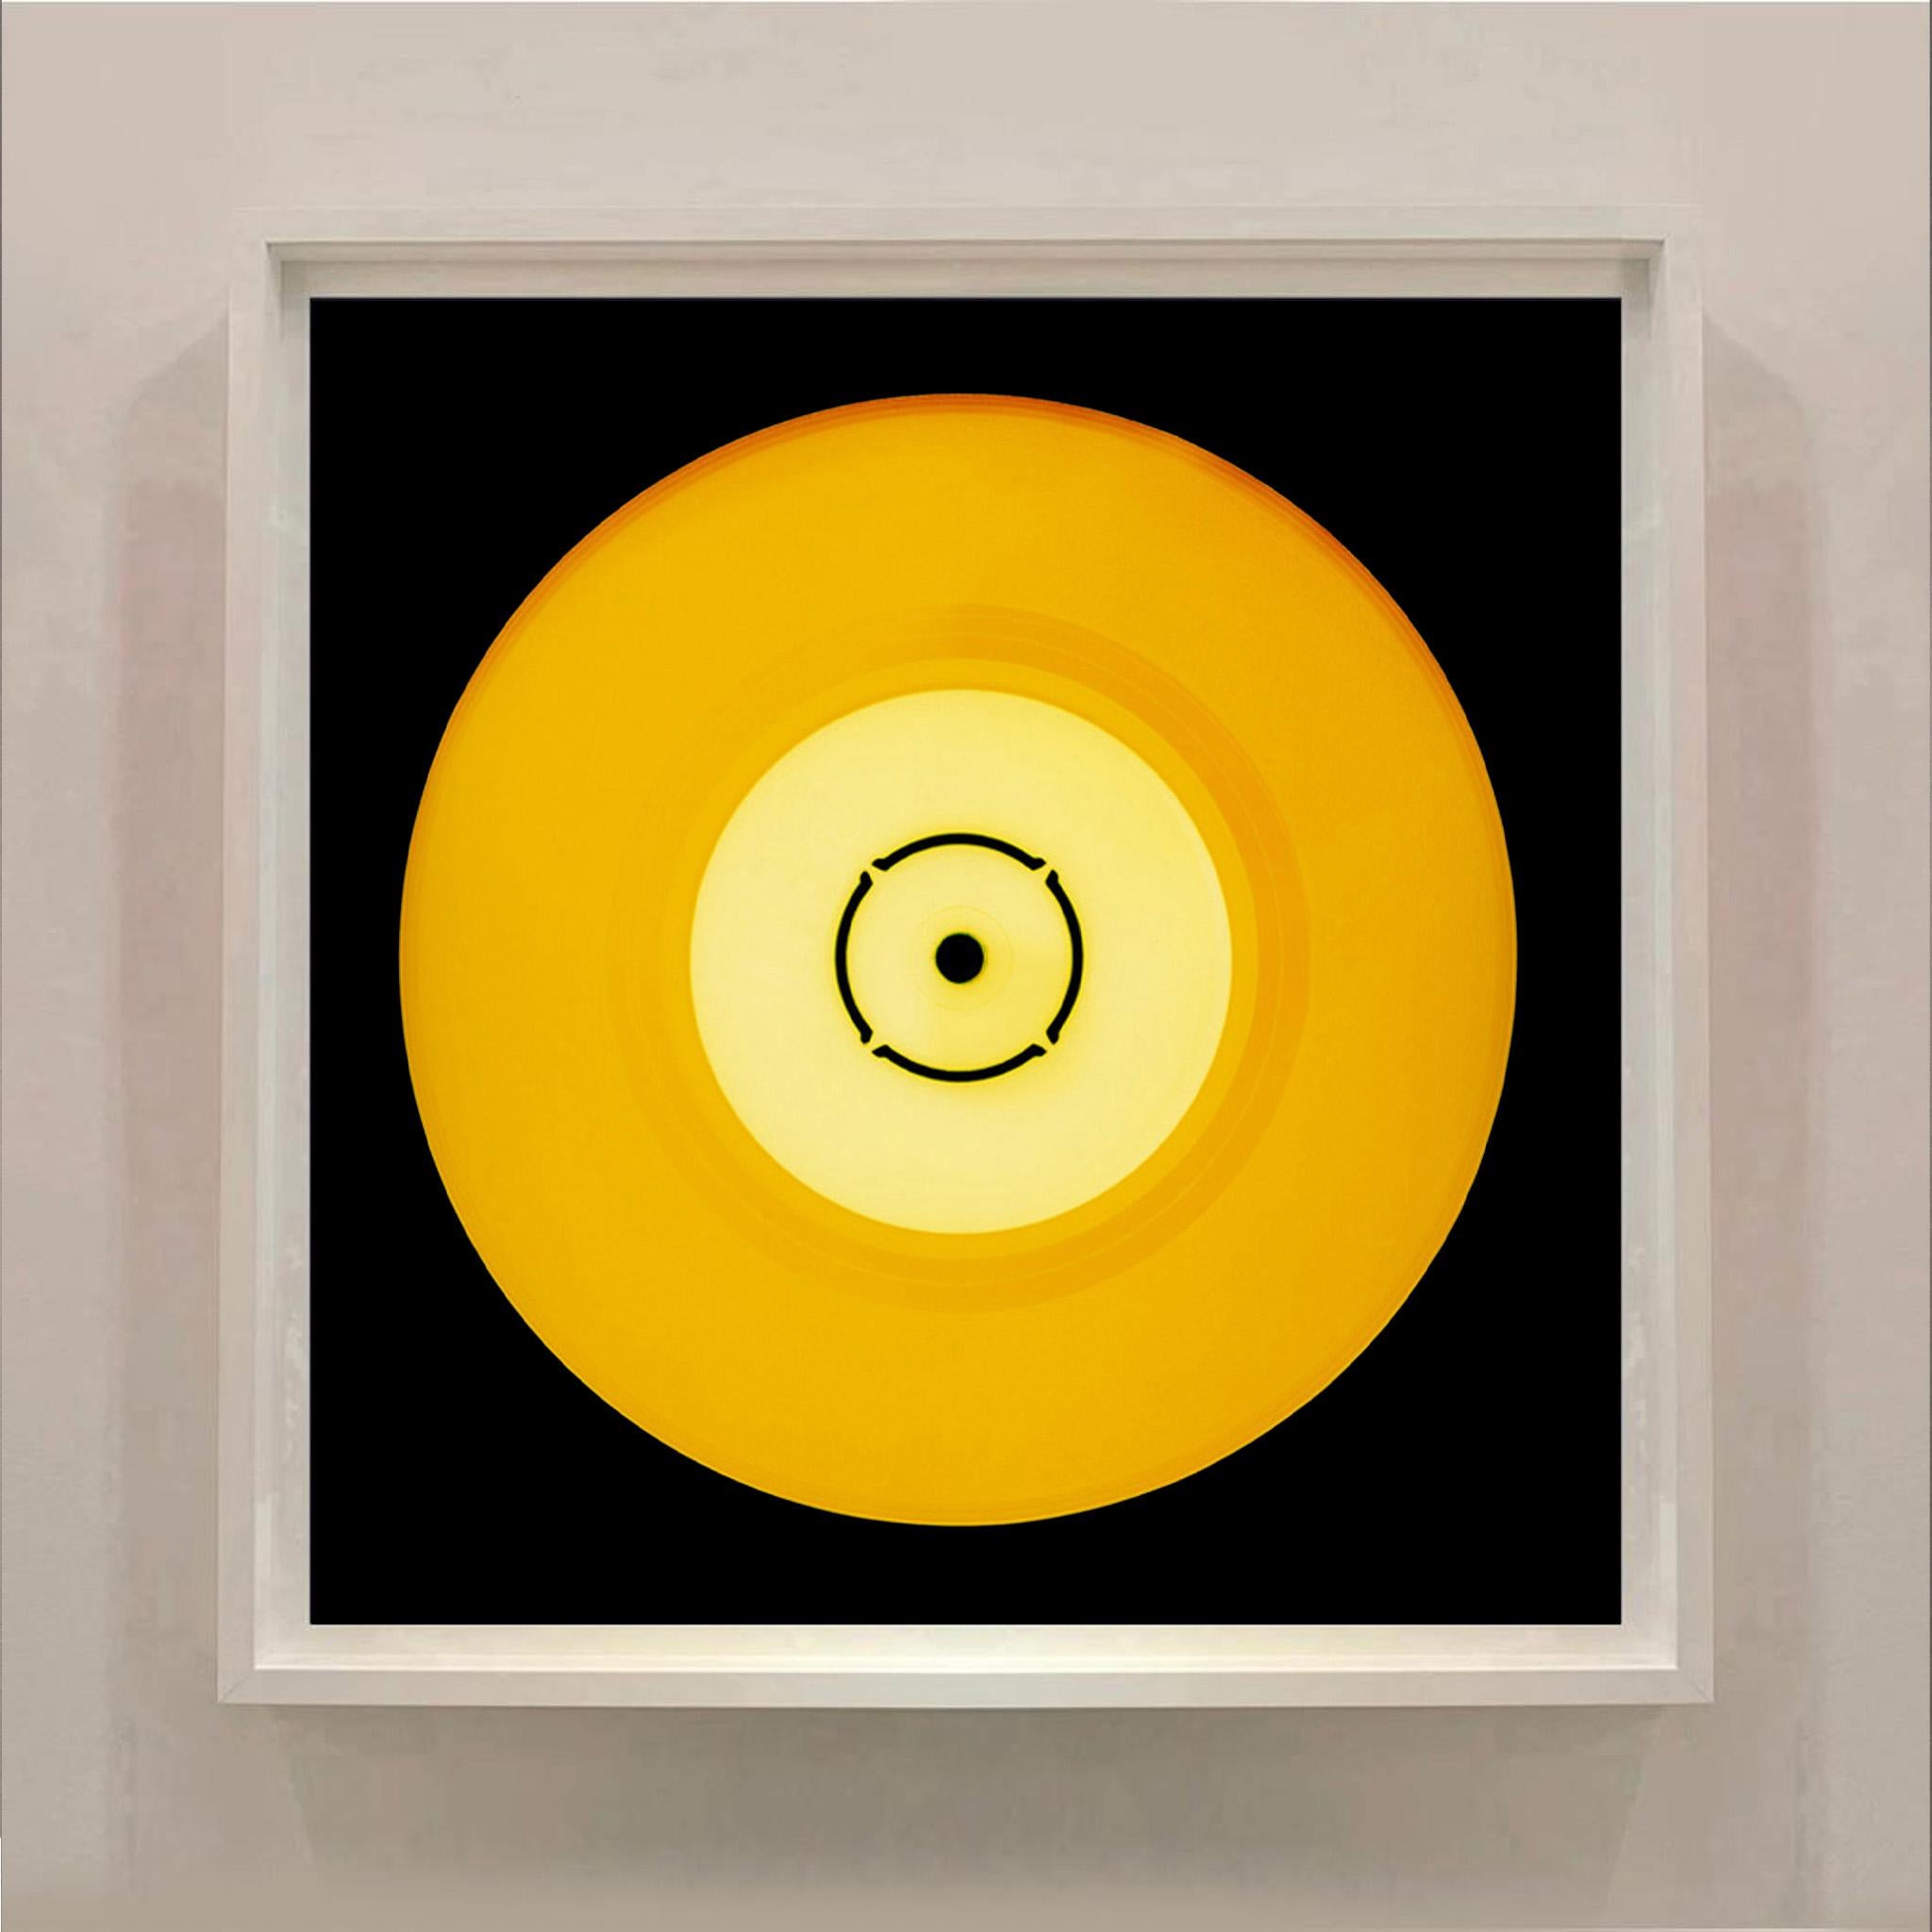 Double B Side Sunshine, from the Heidler & Heeps Vinyl Collection.
Acclaimed contemporary photographers, Richard Heeps and Natasha Heidler have collaborated to make this beautifully mesmerising collection. A celebration of the vinyl record and